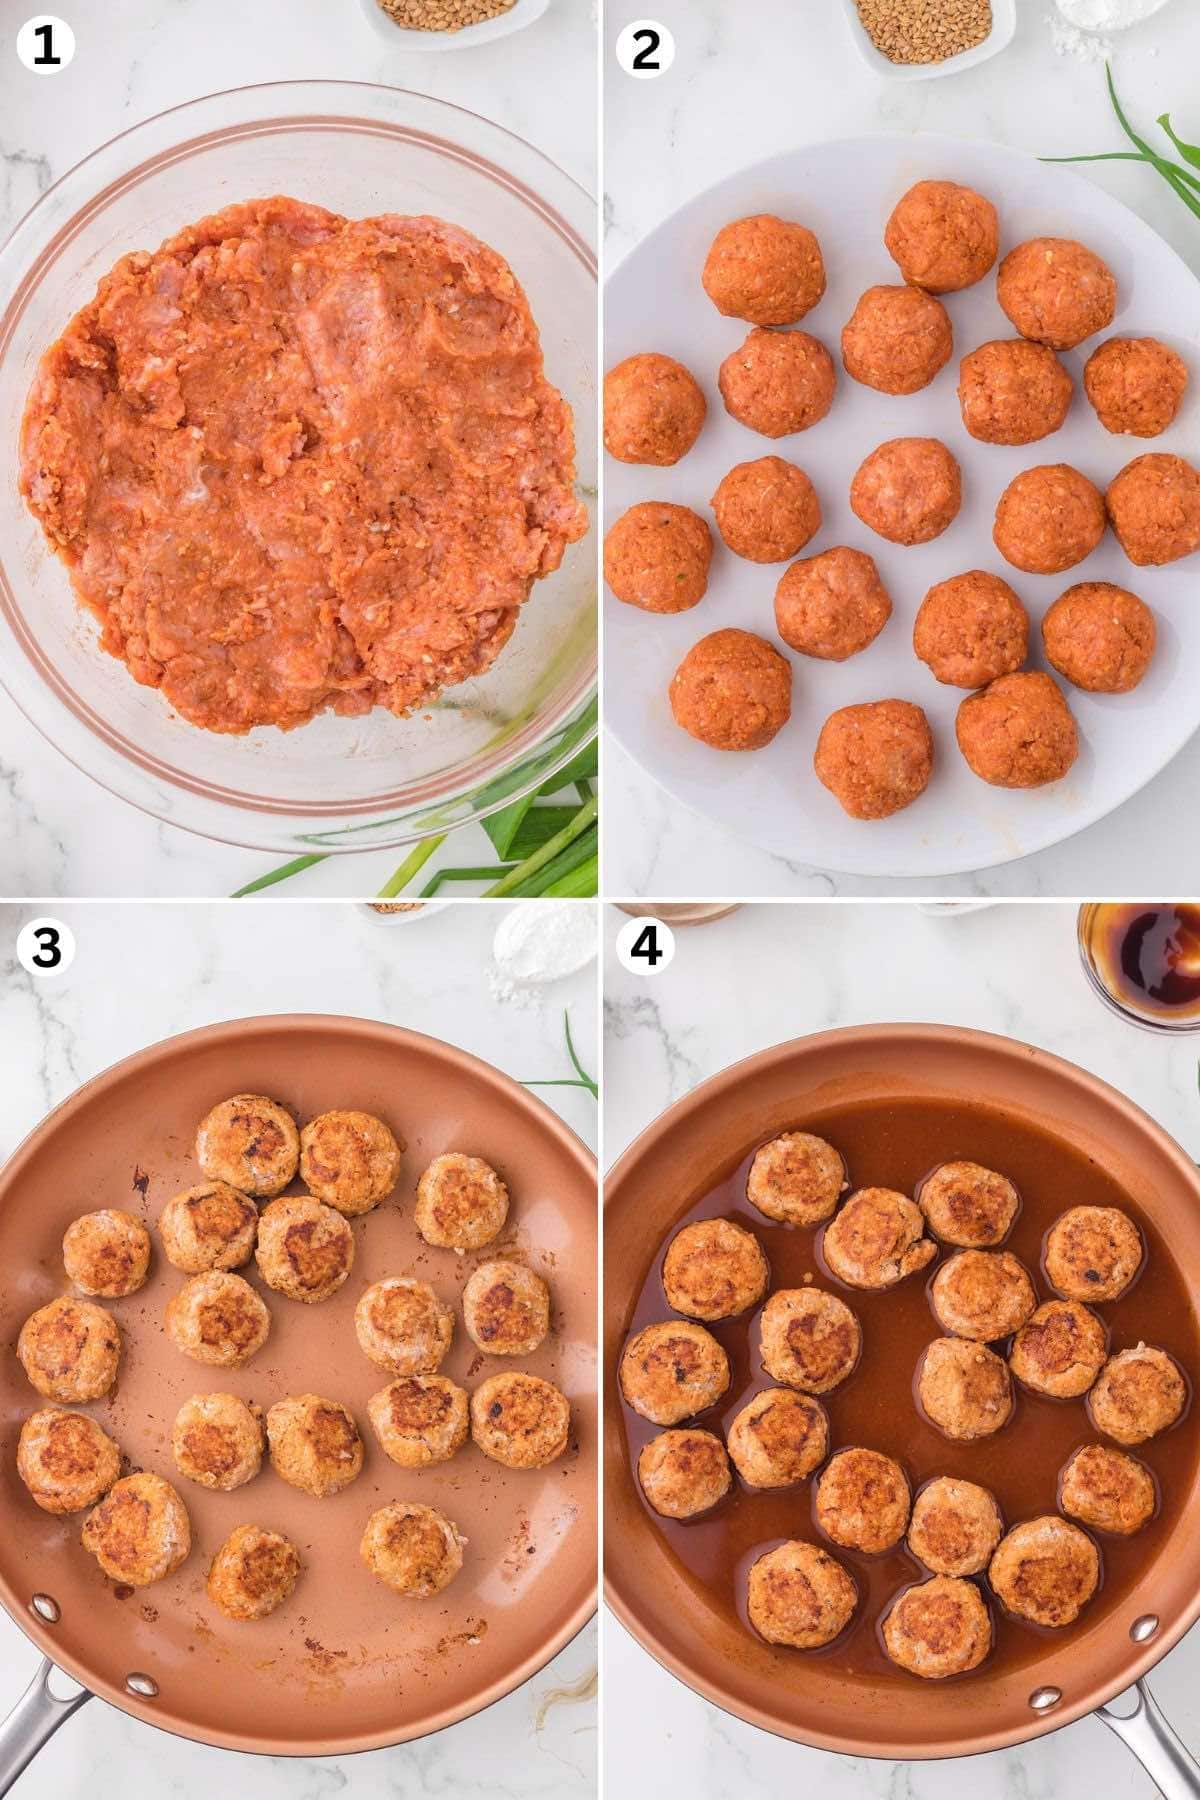 Mix all the ingredients in a large bowl. Scoop the mixture and roll into balls. Cook until brown. Pour the sauce over the meatballs and simmer.